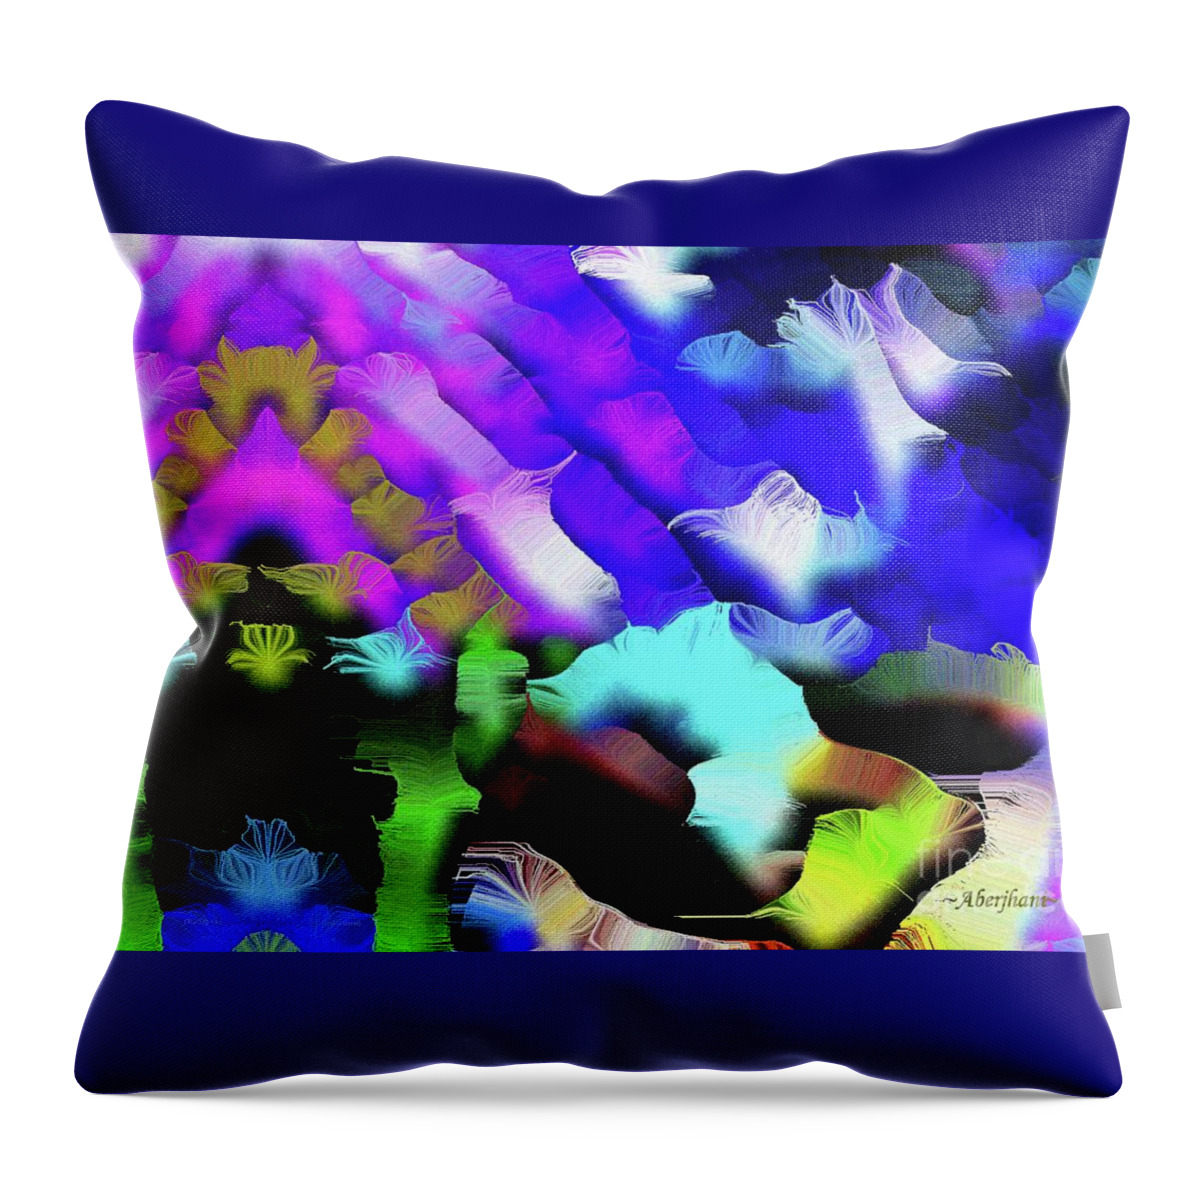 Compassion Throw Pillow featuring the painting Remembering Not to Forget Why Love Is So Important by Aberjhani